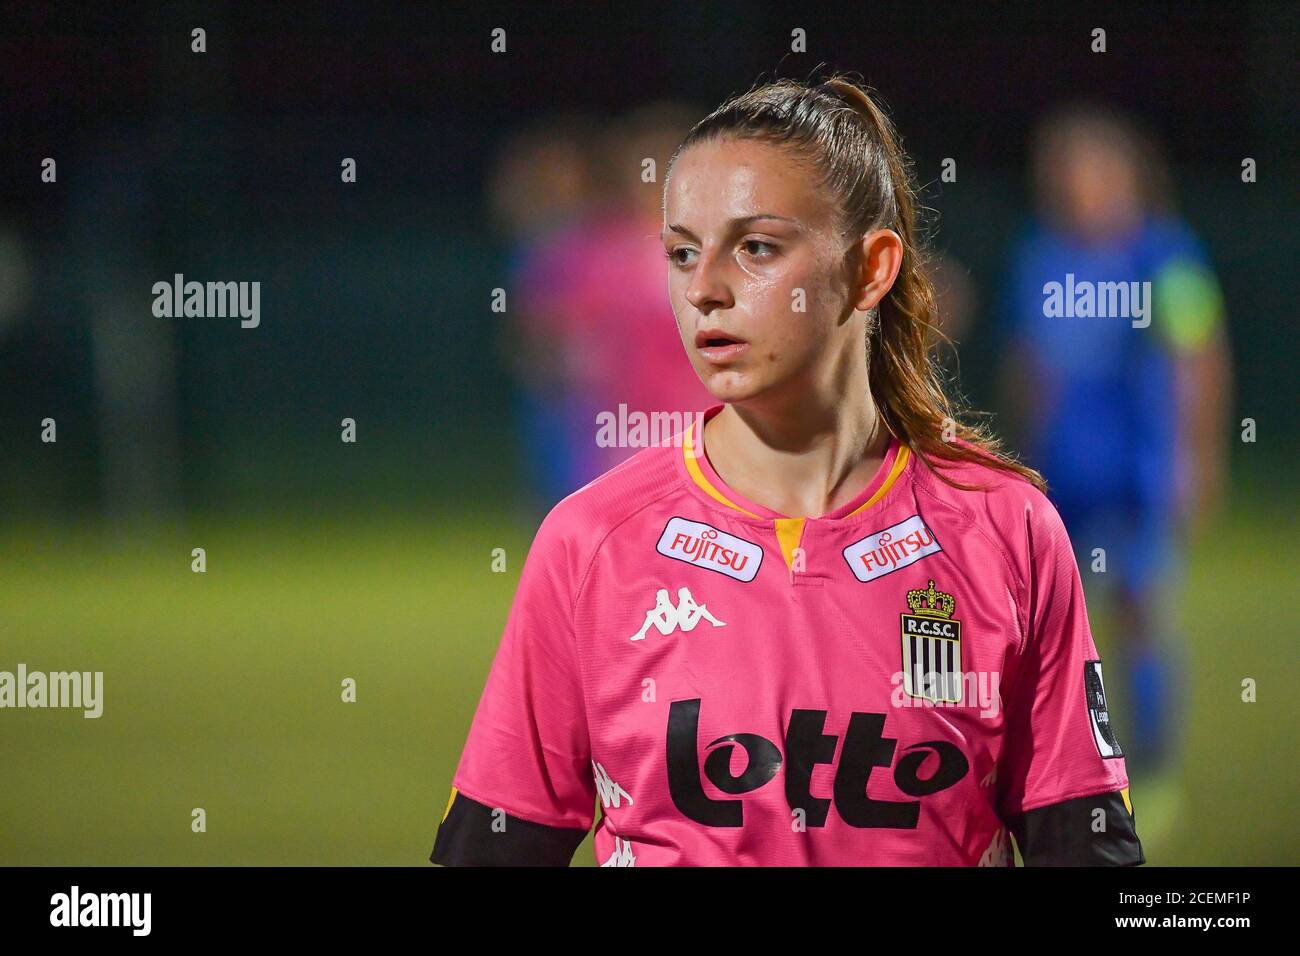 Charleroi S Defender Chrystal Lermusiaux 2 Pictured During A Female Soccer Game Between Krc Genk Ladies And Sporting Charleroi On The First Matchday Of The 21 Season Of Belgian Women S Superleague